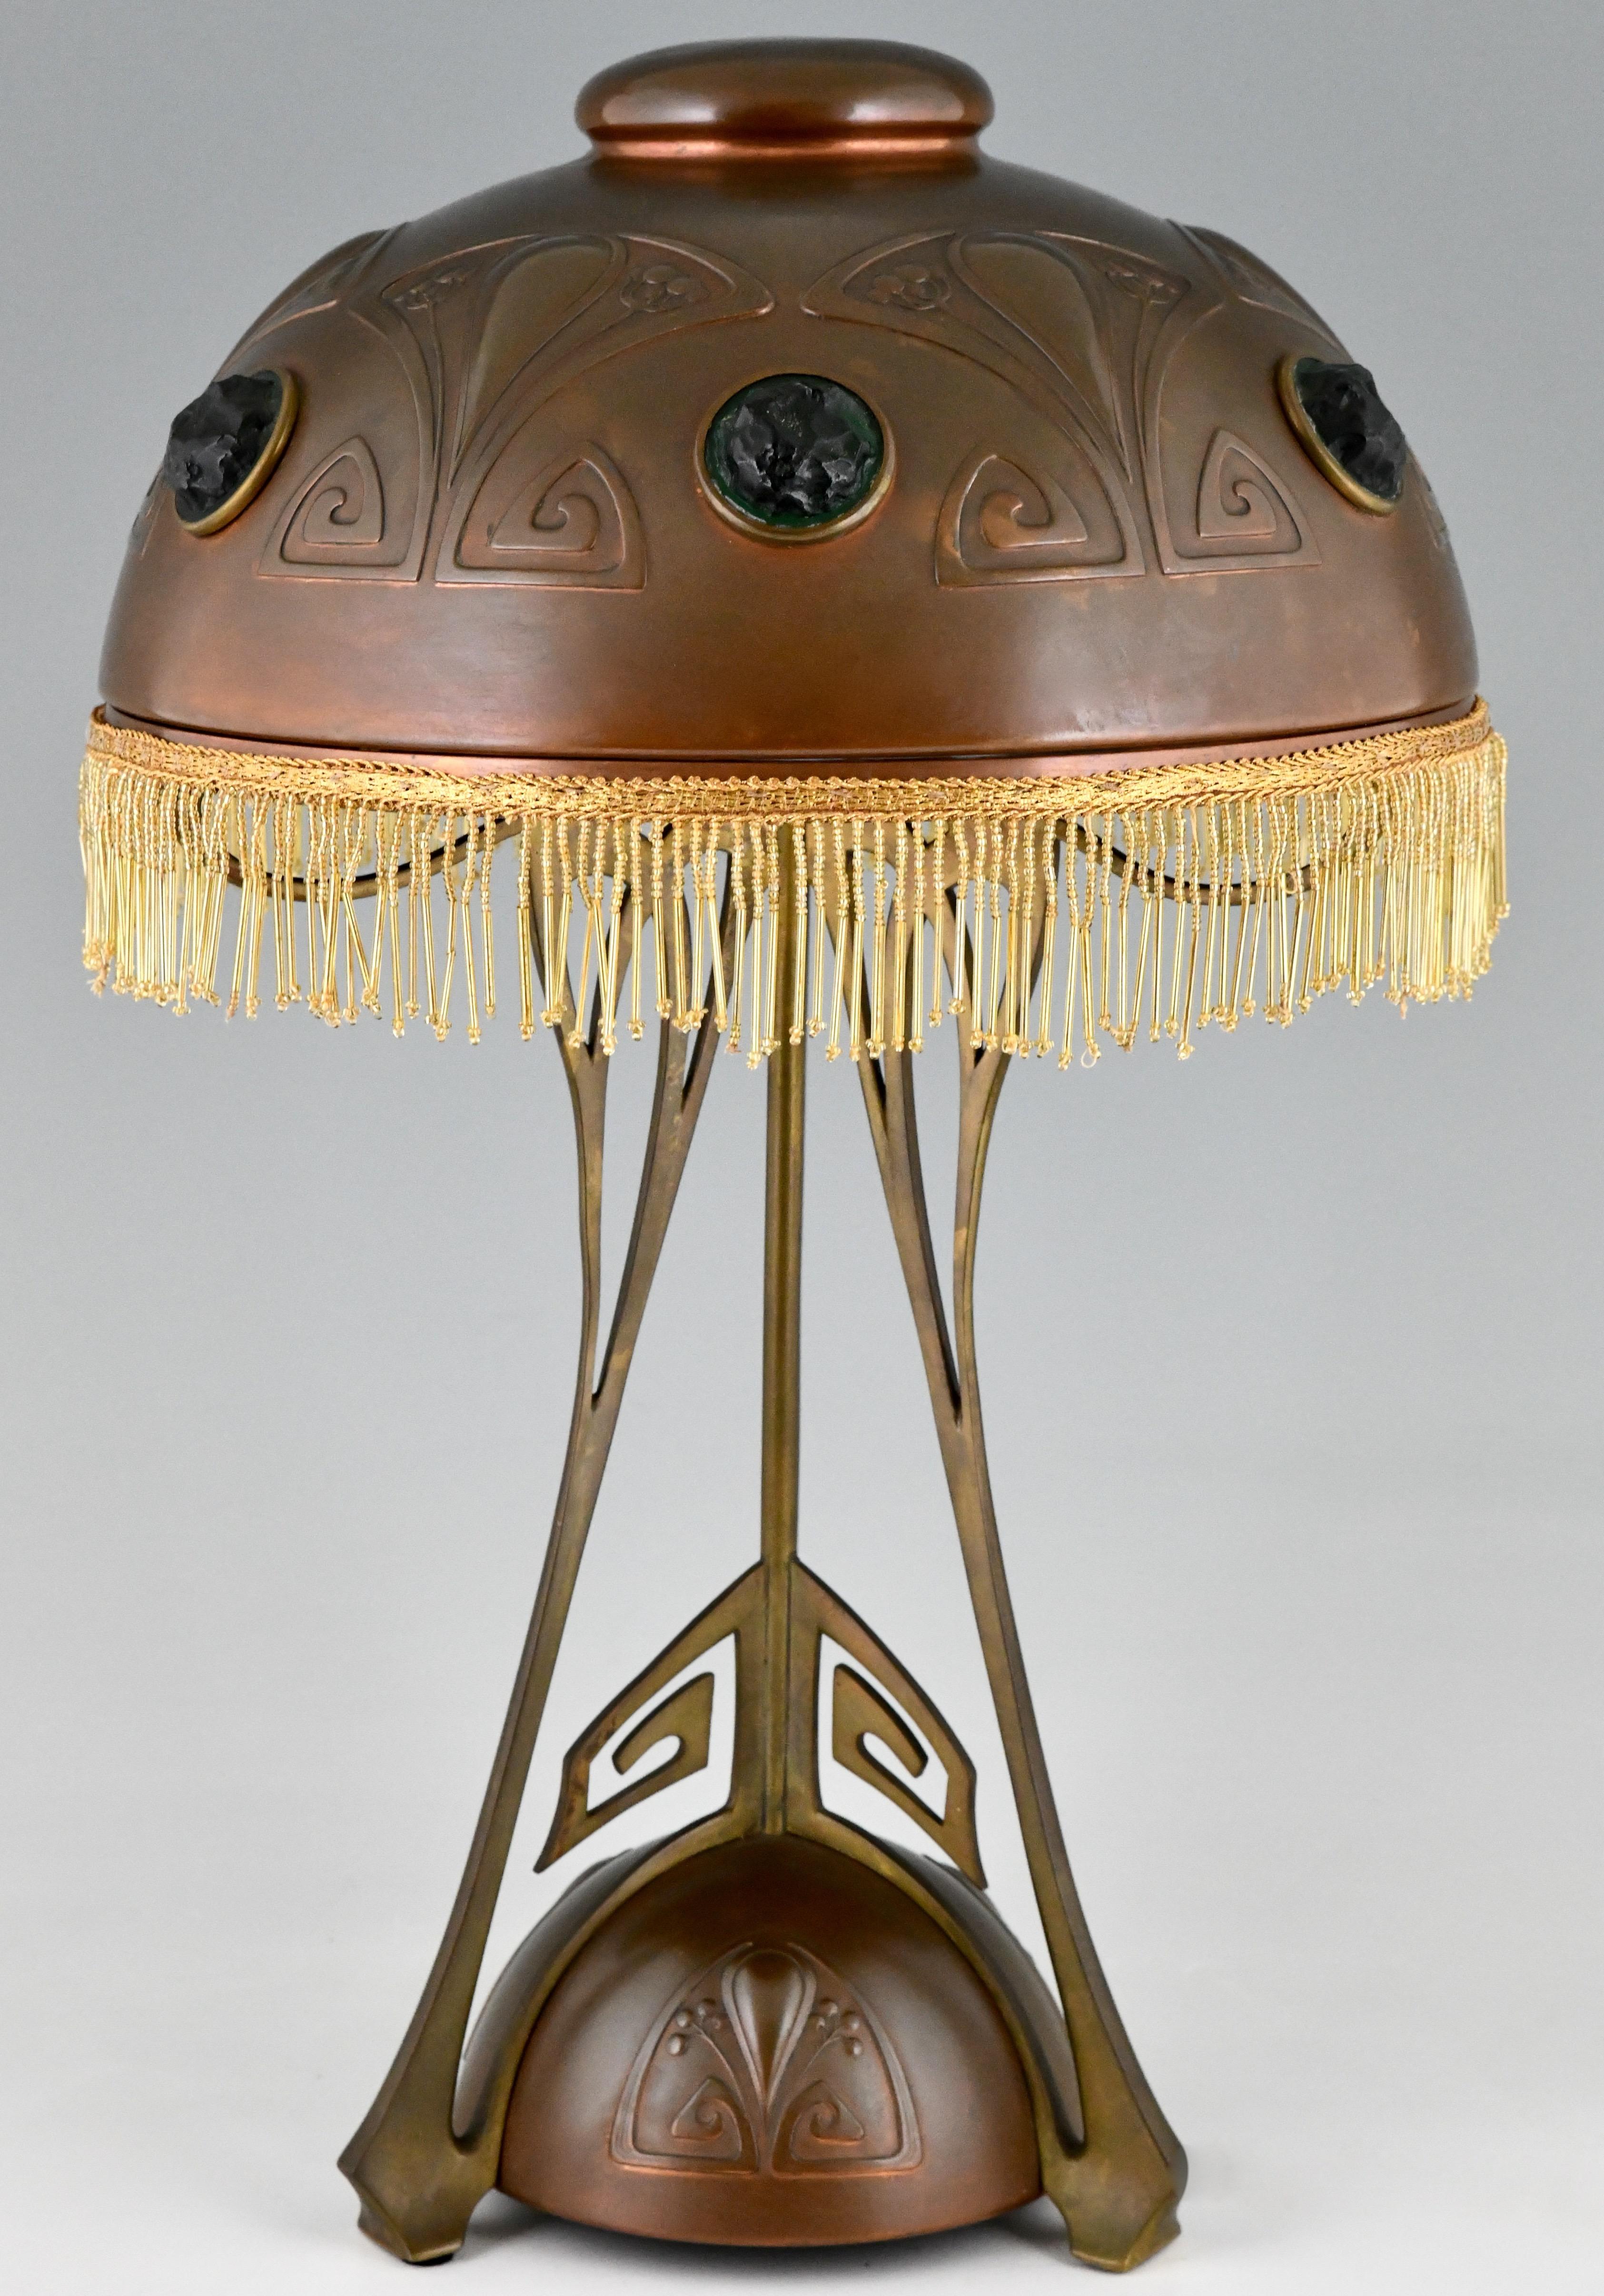 Art Nouveau copper, brass and glass cabochons table lamp with beaded fringe by WMF ca. 1900.
Literature:
”Art nouveau domestic metalwork from Württembergische Metallwaren Fabrik 1906” published by the antique Collectors Club.?“Das